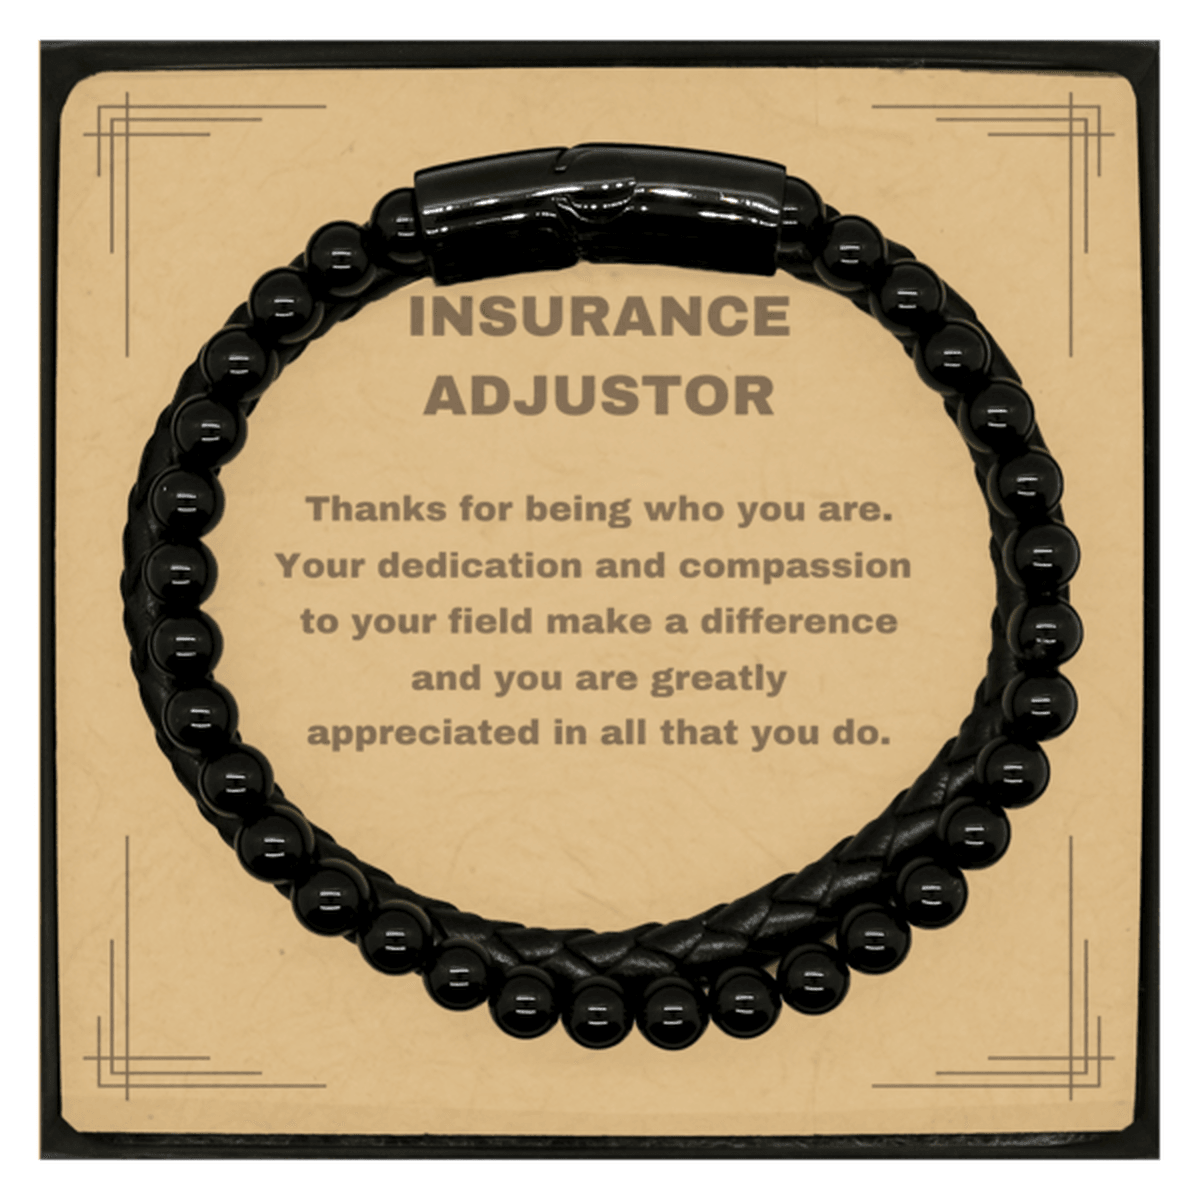 Insurance Adjustor Black Braided Leather Stone Bracelet - Thanks for being who you are - Birthday Christmas Jewelry Gifts Coworkers Colleague Boss - Mallard Moon Gift Shop